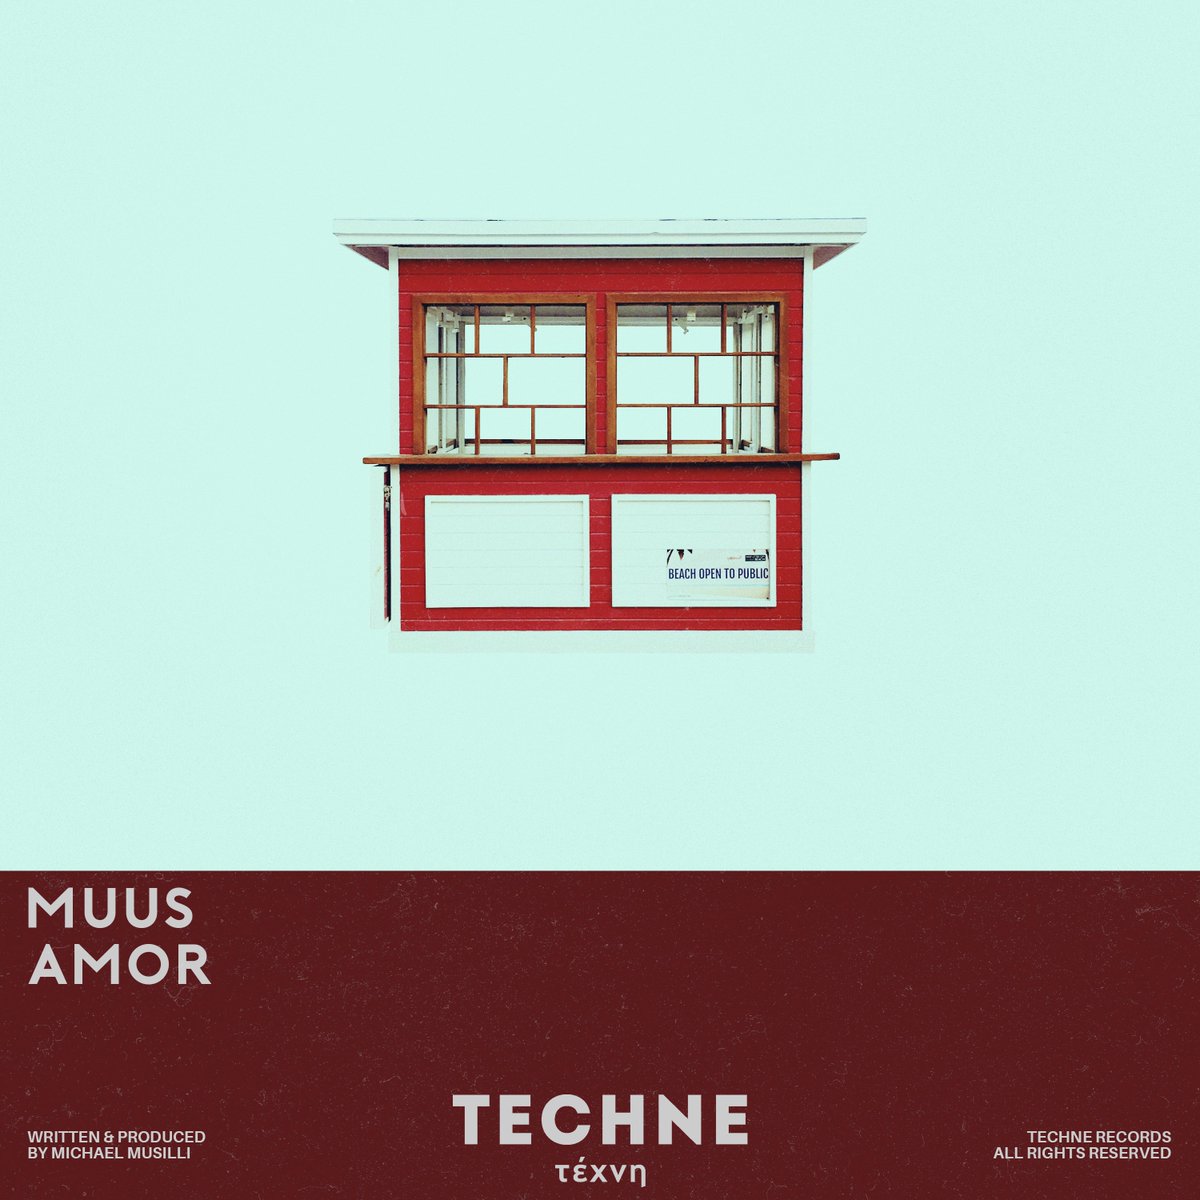 We've got another #heater for you guys this Friday! @muusmusic is back with a banger❤️‍🔥 Pre-save 'Amor' now 👇 techne.ffm.to/amor